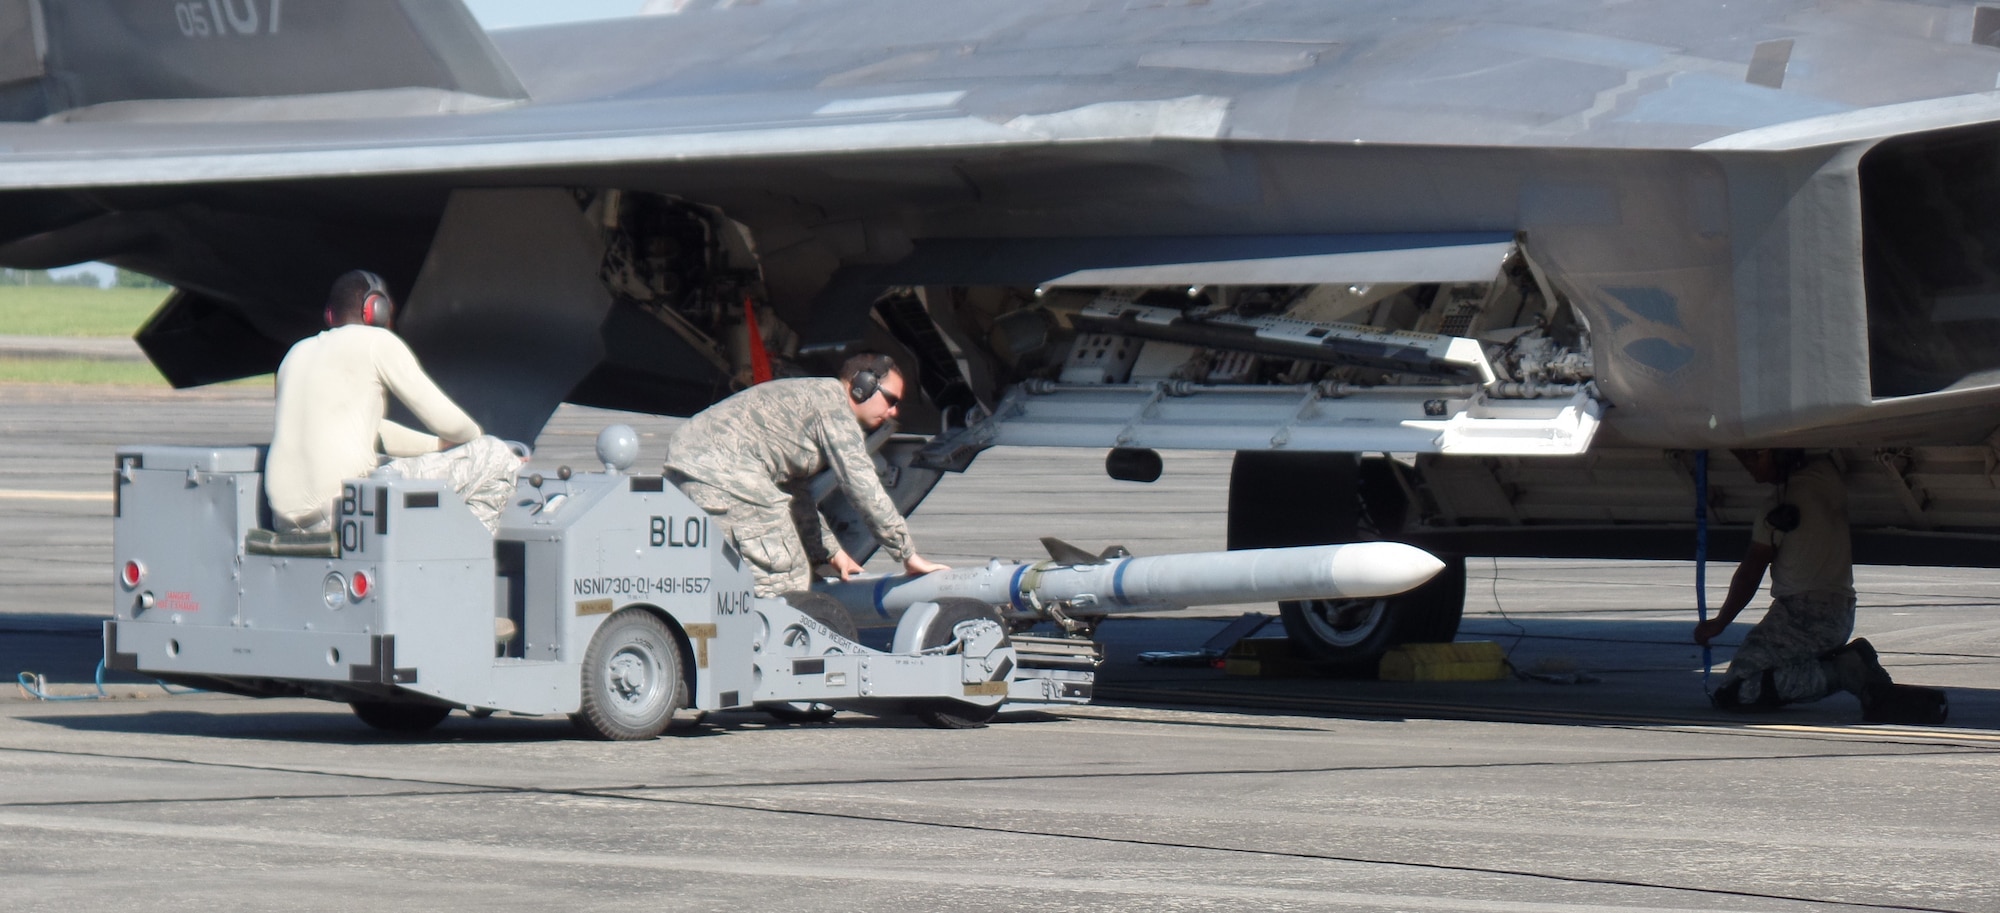 Airmen simulate arming an F-22 Raptor during the Combat Support Wing exercise at Moody AFB, Georgia on 18 September.